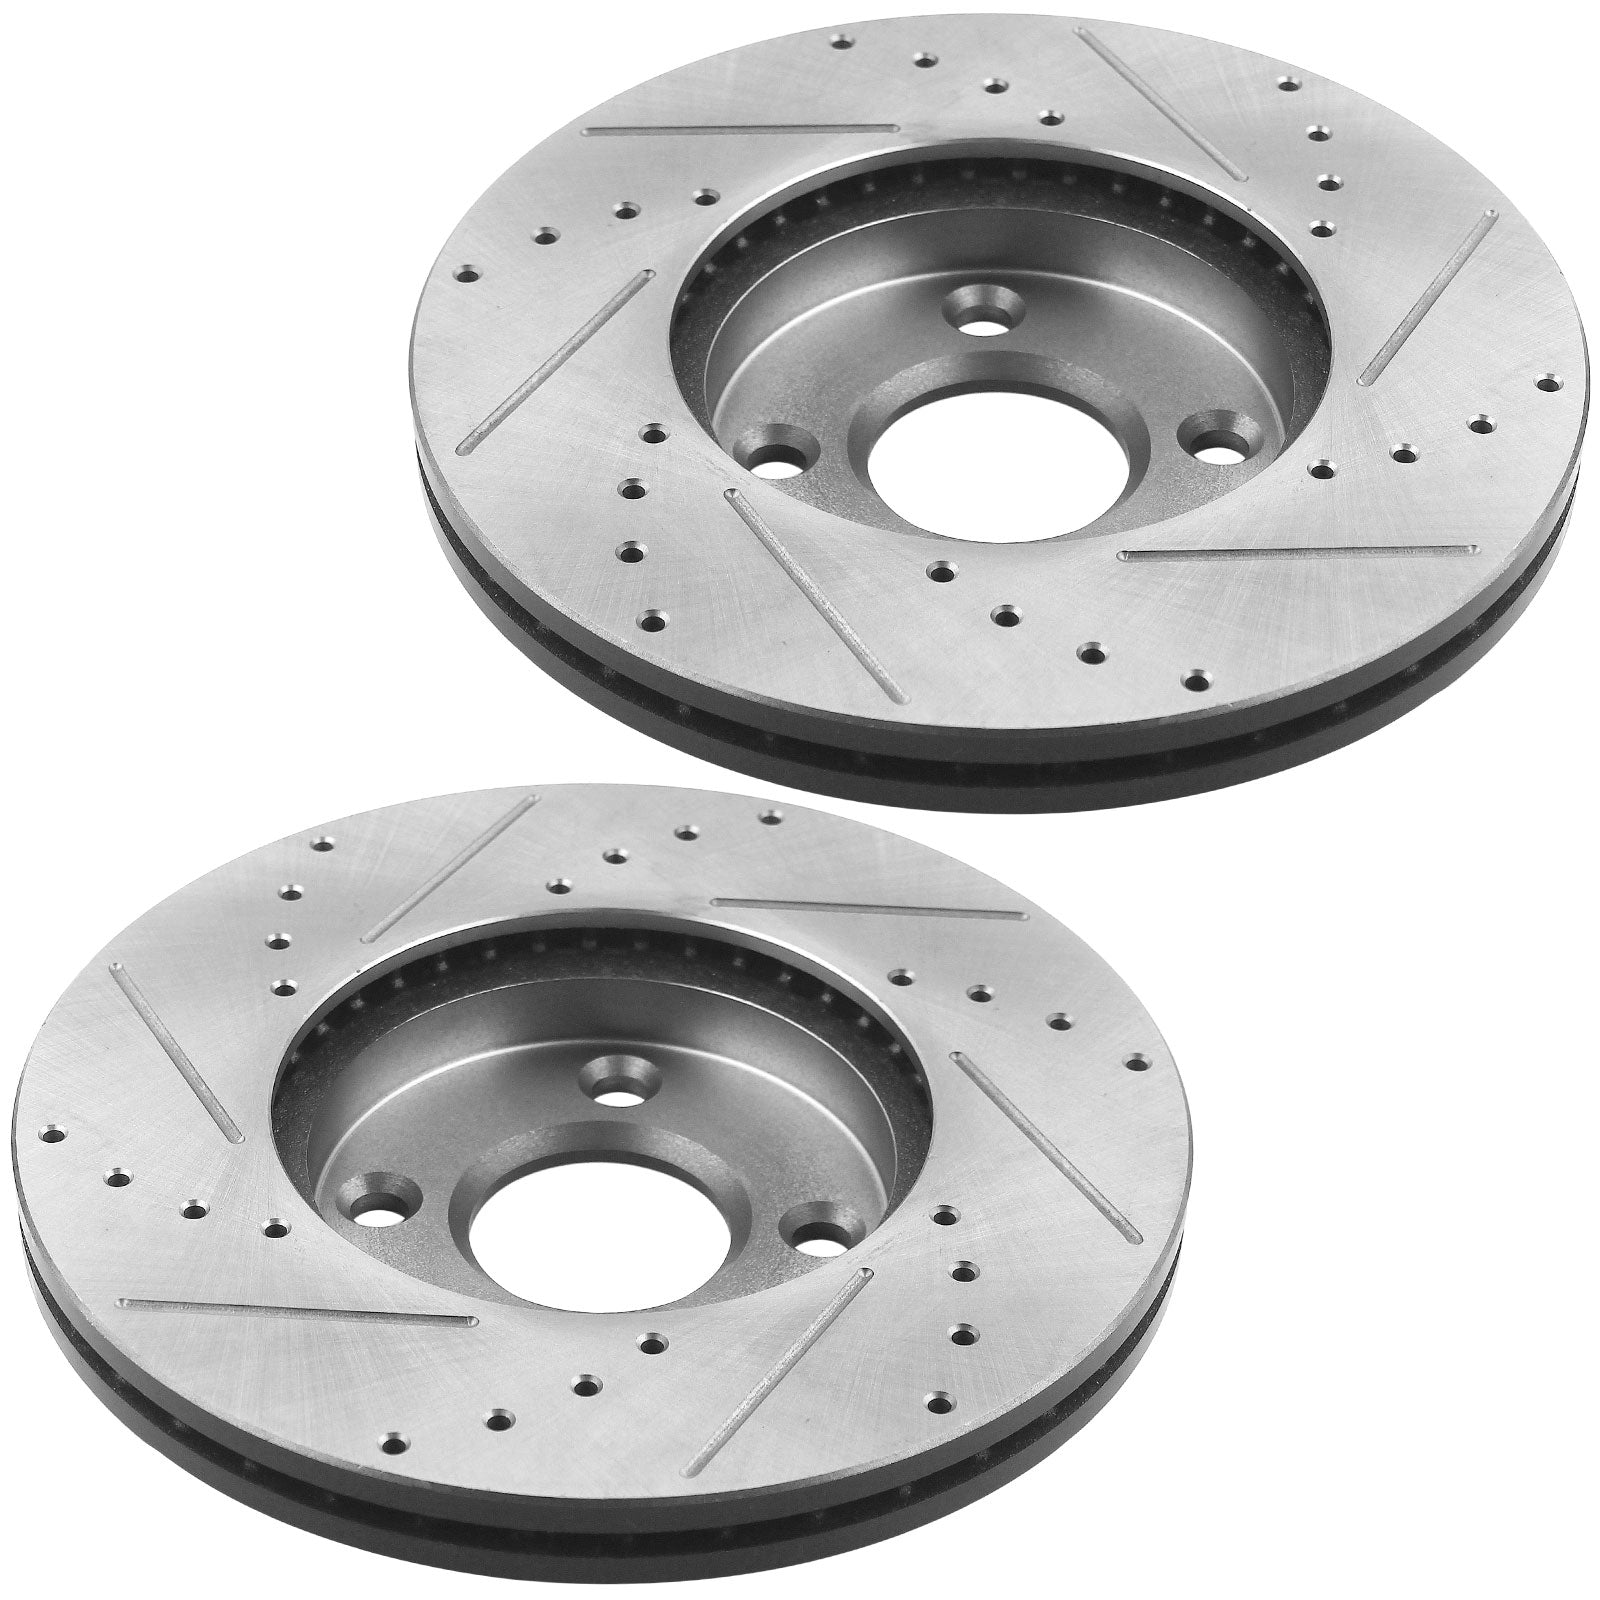 Front Drilled & Slotted Brake Rotors w/Ceramic Brake Pads w/Cleaner & Fluid Fit for 2005 2006 2007 Ford Focus(Not SVT Models) Front Brake Pads Brake Rotors, 4 Lugs(Bolts Not Included) MotorbyMotor